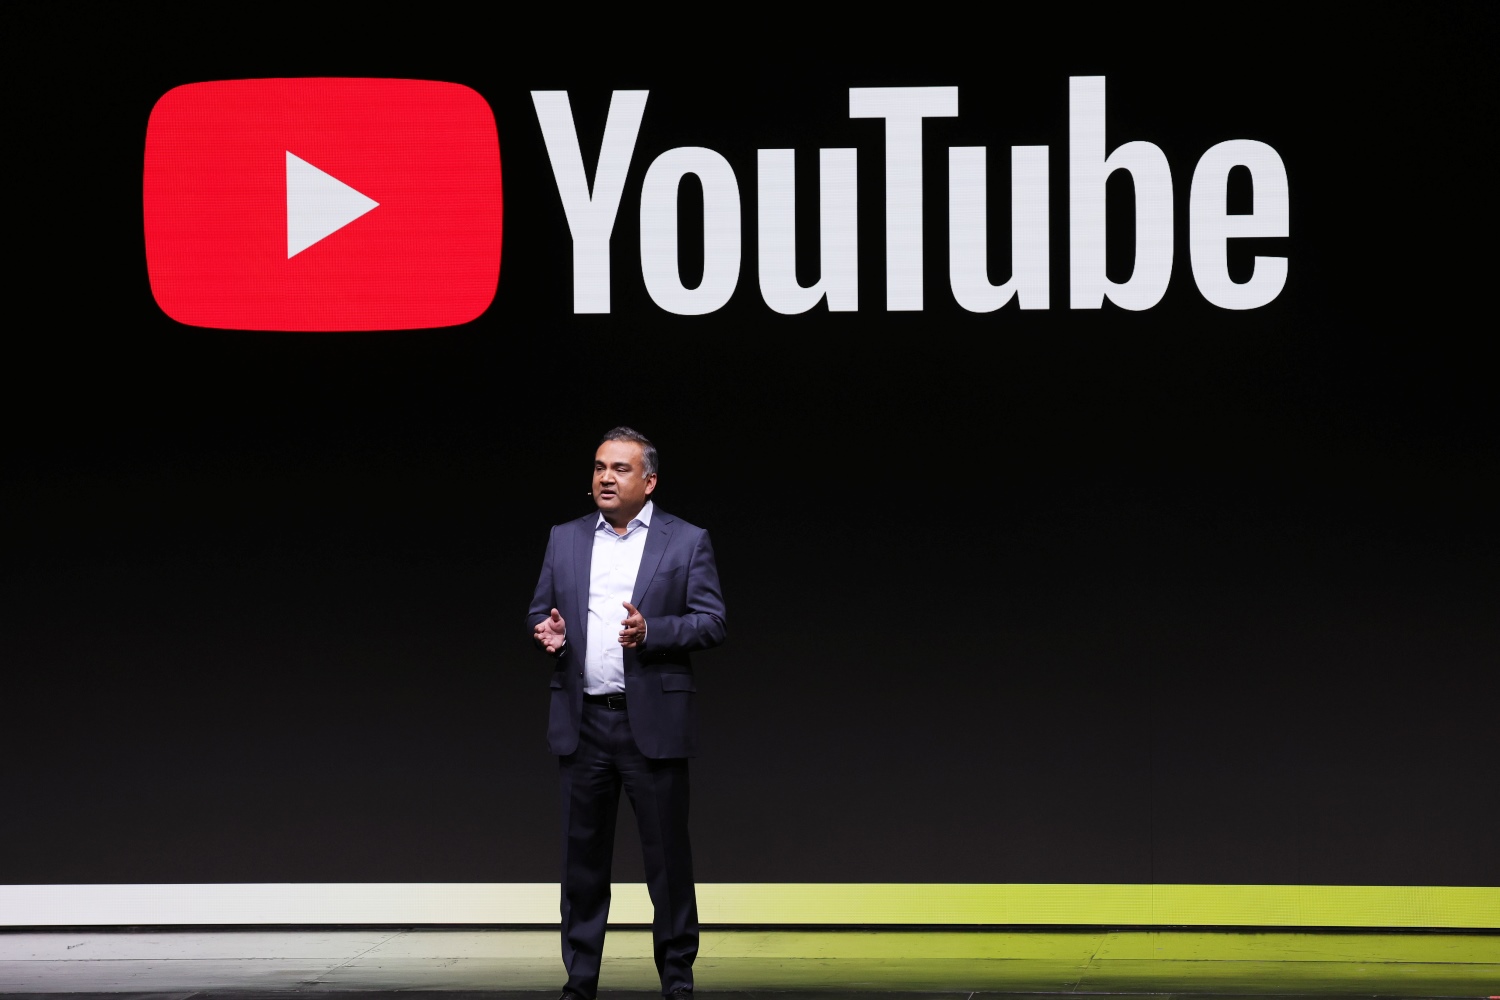 YouTube CEO Neal Mohan is in a conference